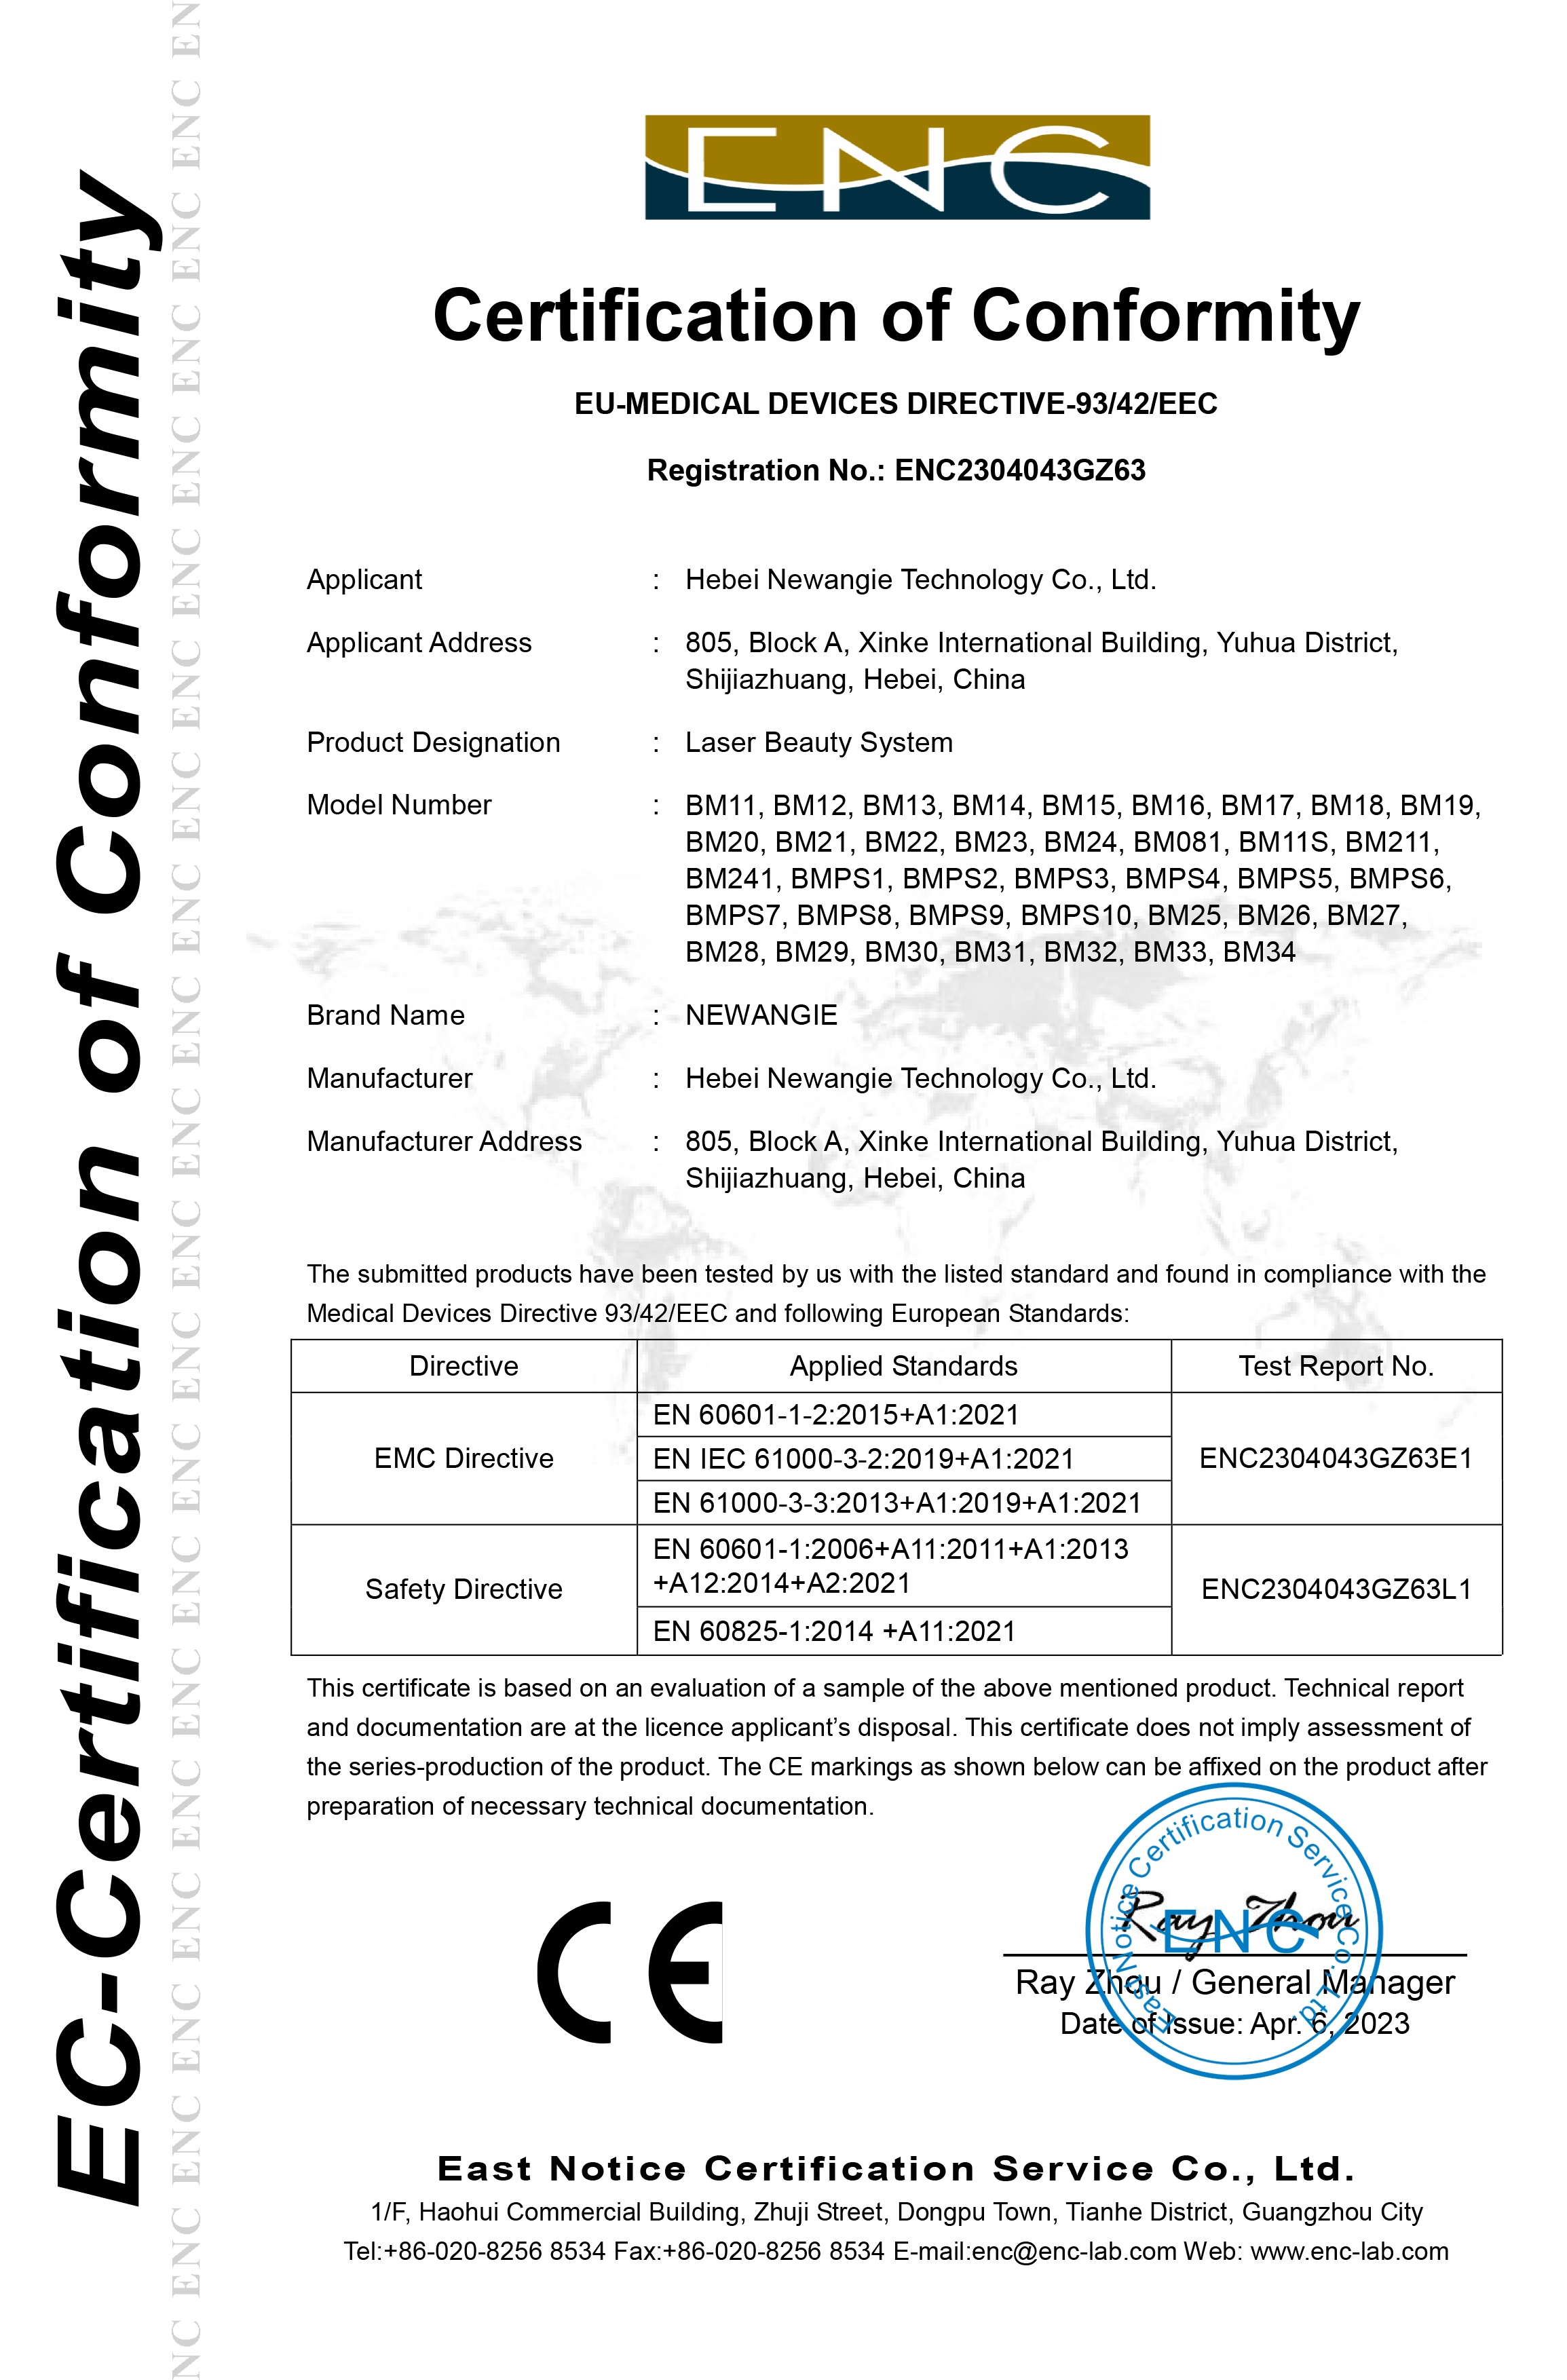 Hair removal machine certificate